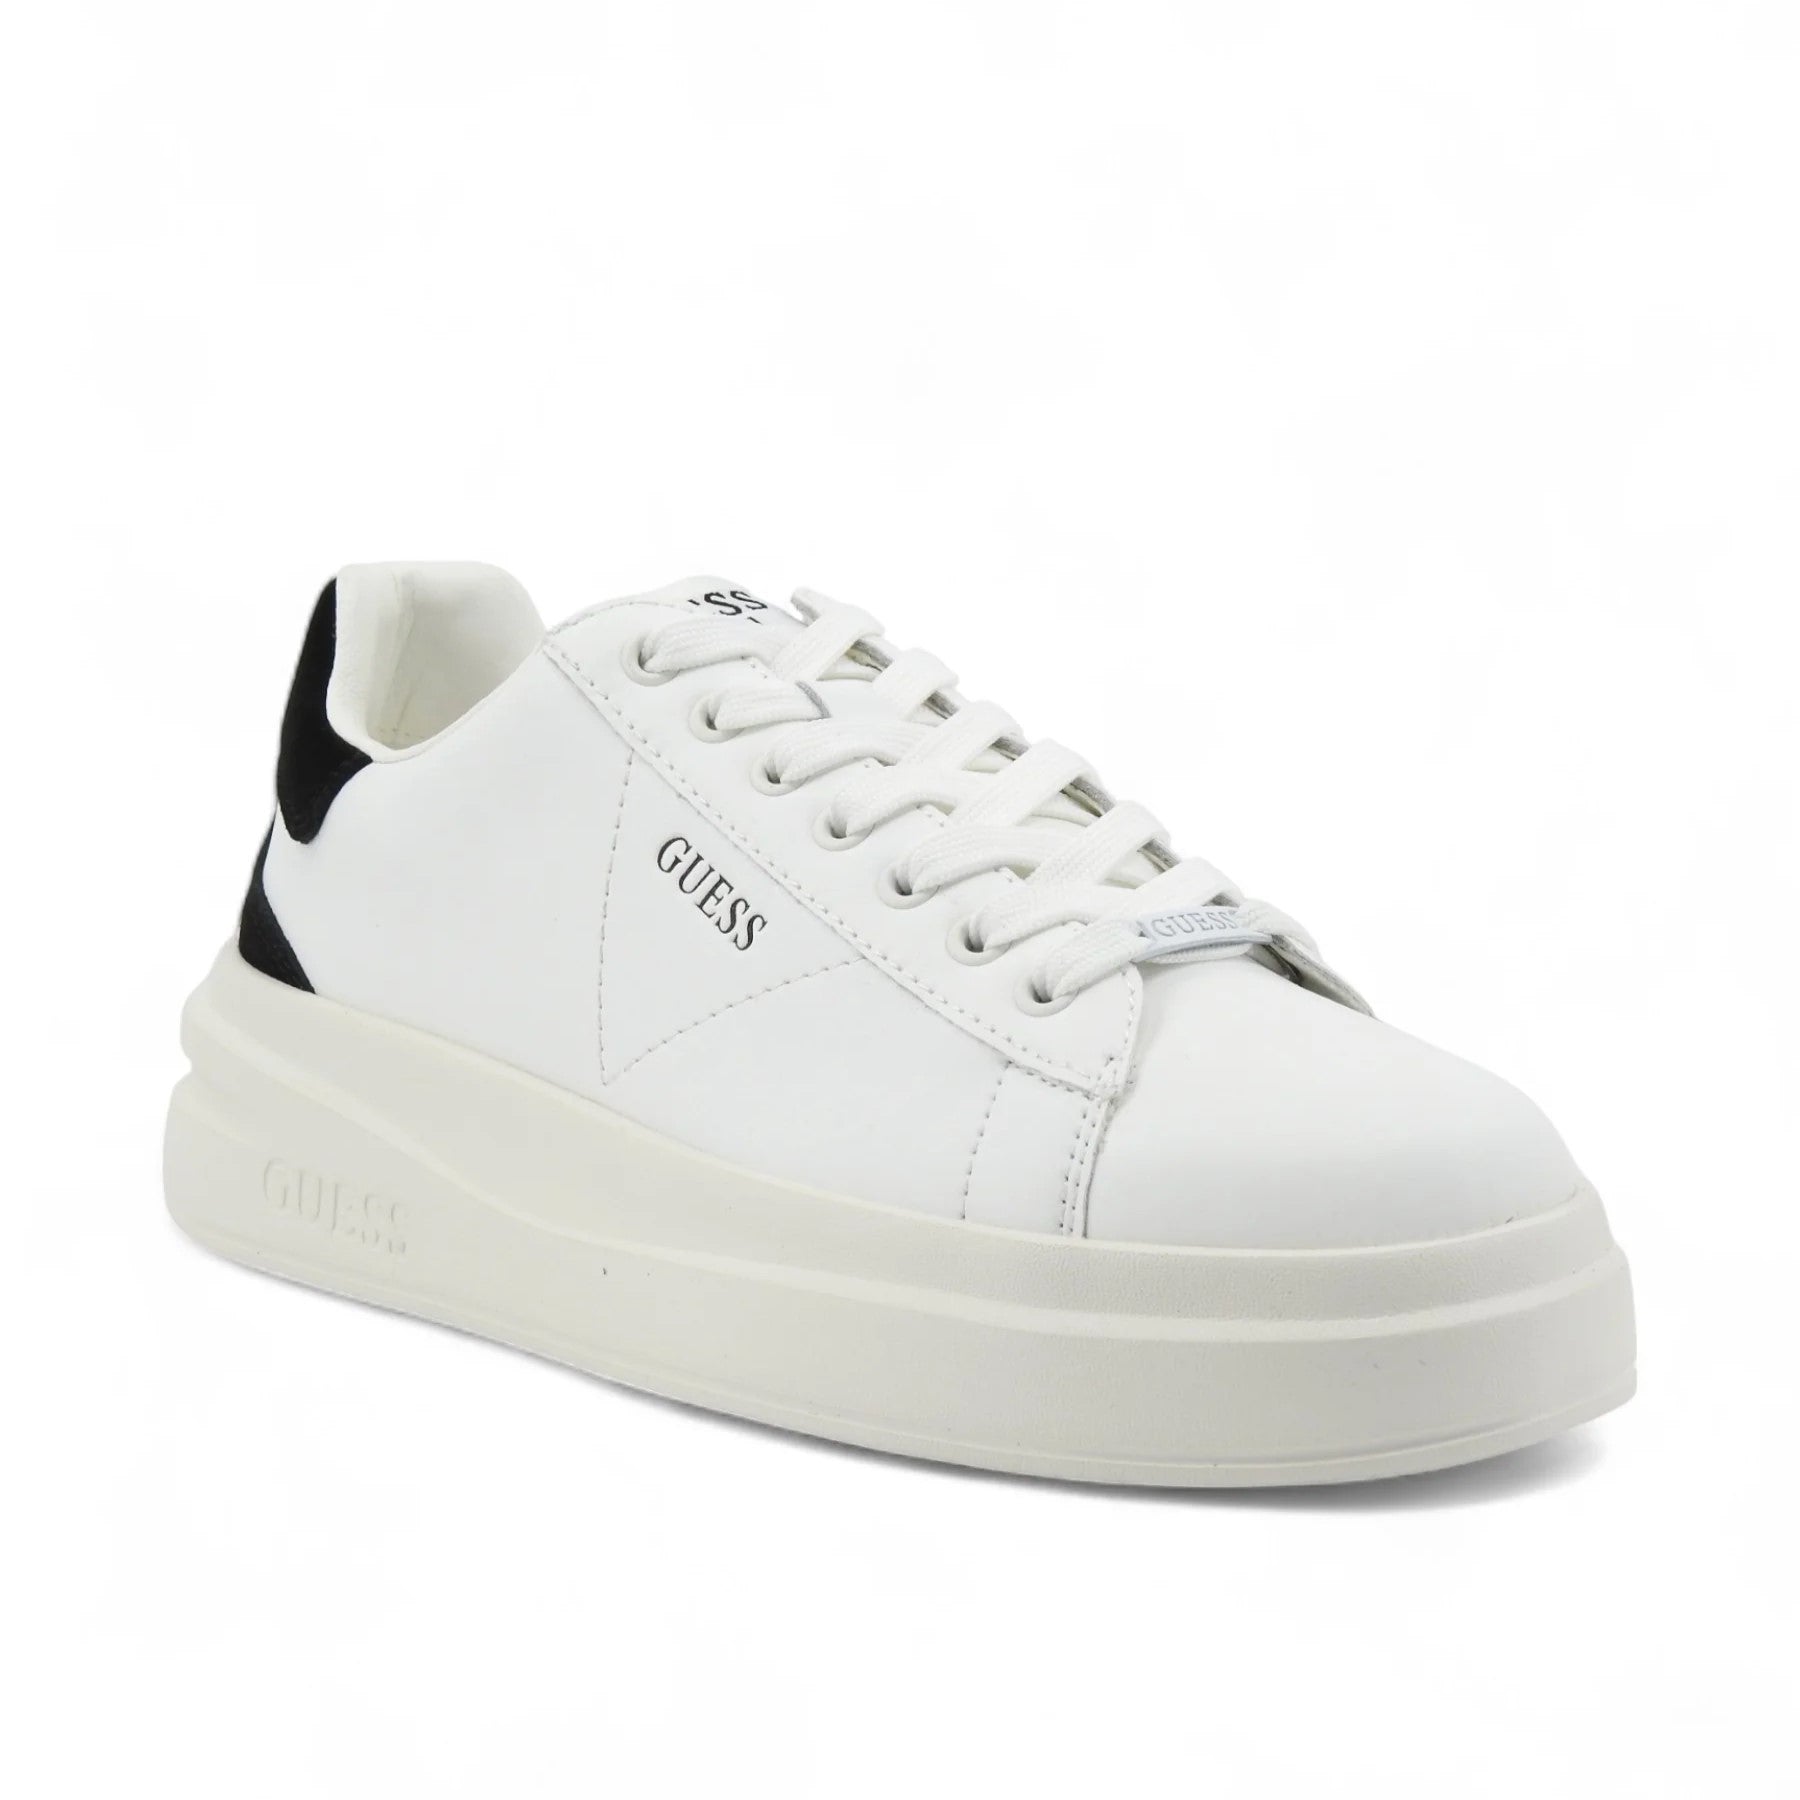 Sneakers Guess Donna Elbina Bianco/nero